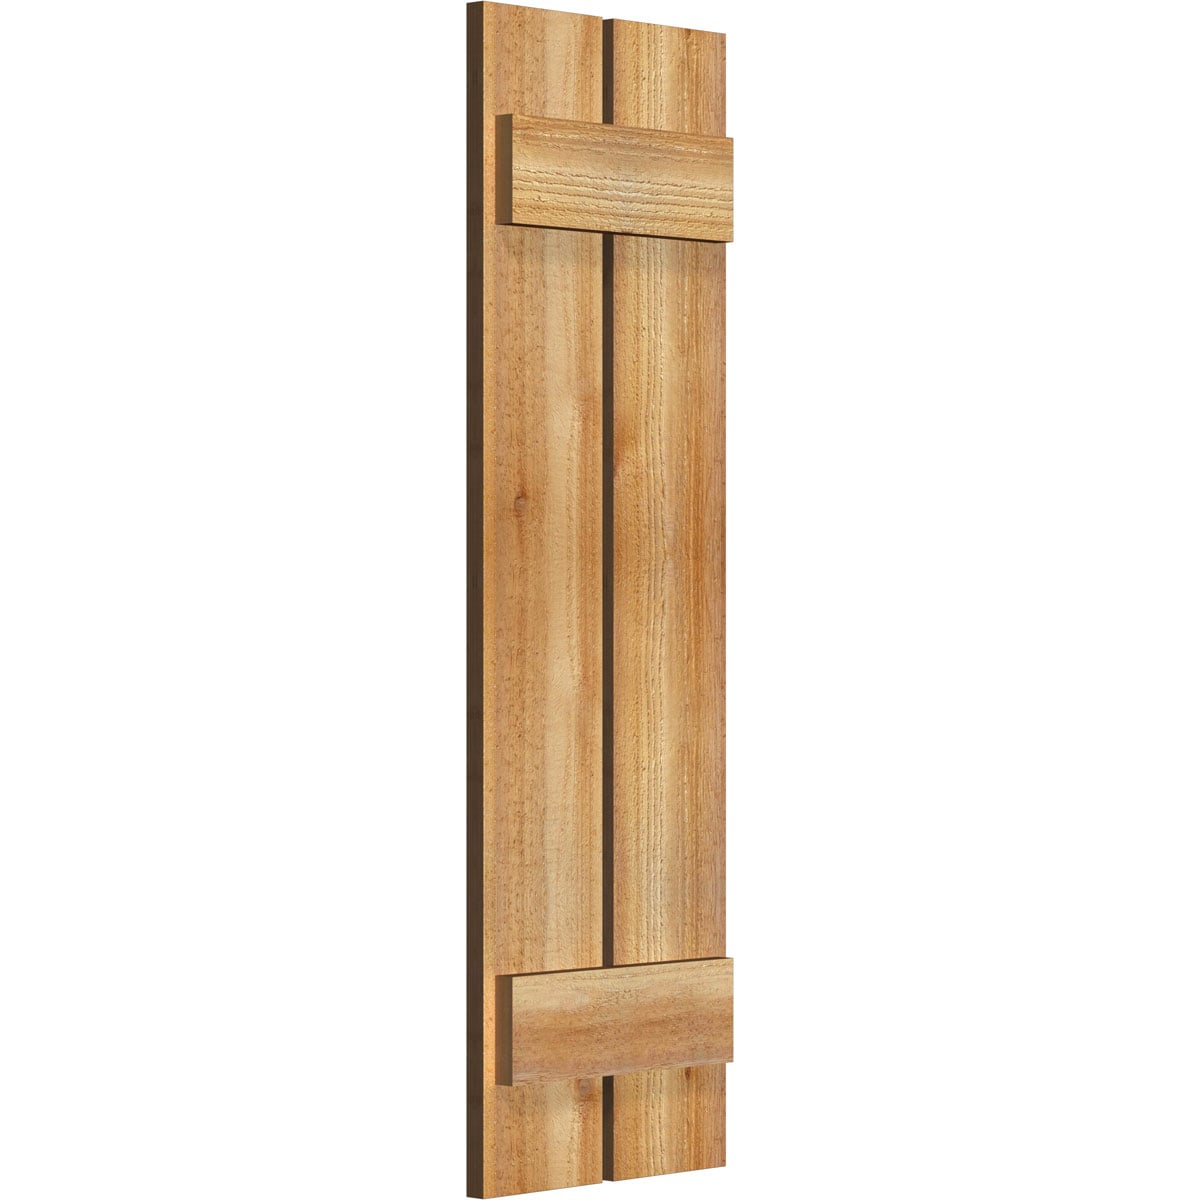 Ekena Millwork 2-Pack 11.25-in W x 37-in H Unfinished Board and Batten Spaced Wood Western Red cedar Exterior Shutters